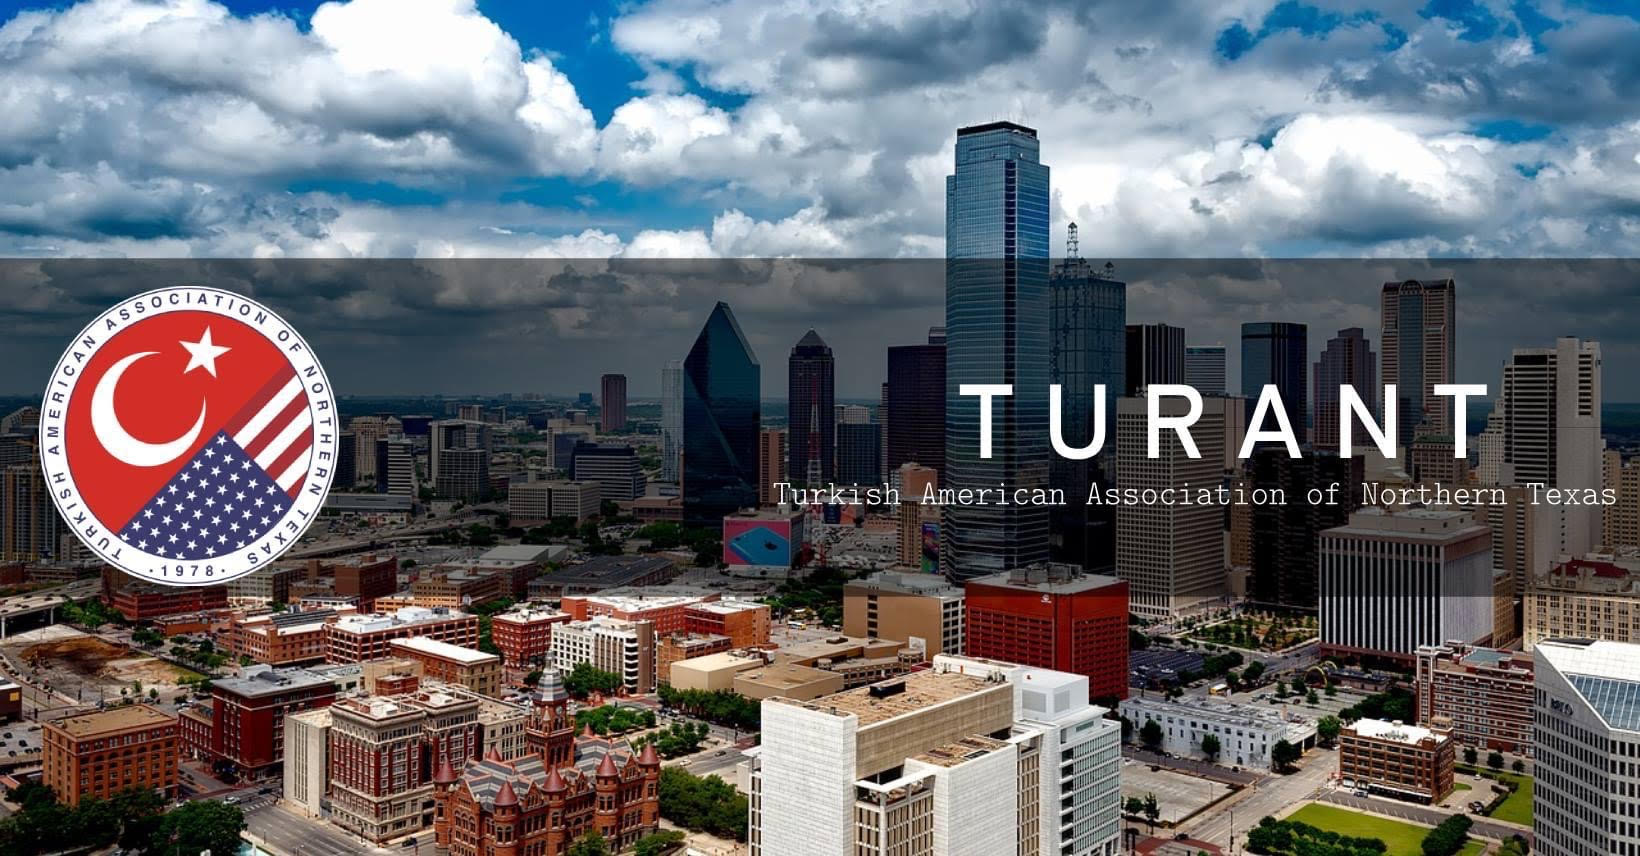 Dallas Skyline with Turant- Turkish American Association Text